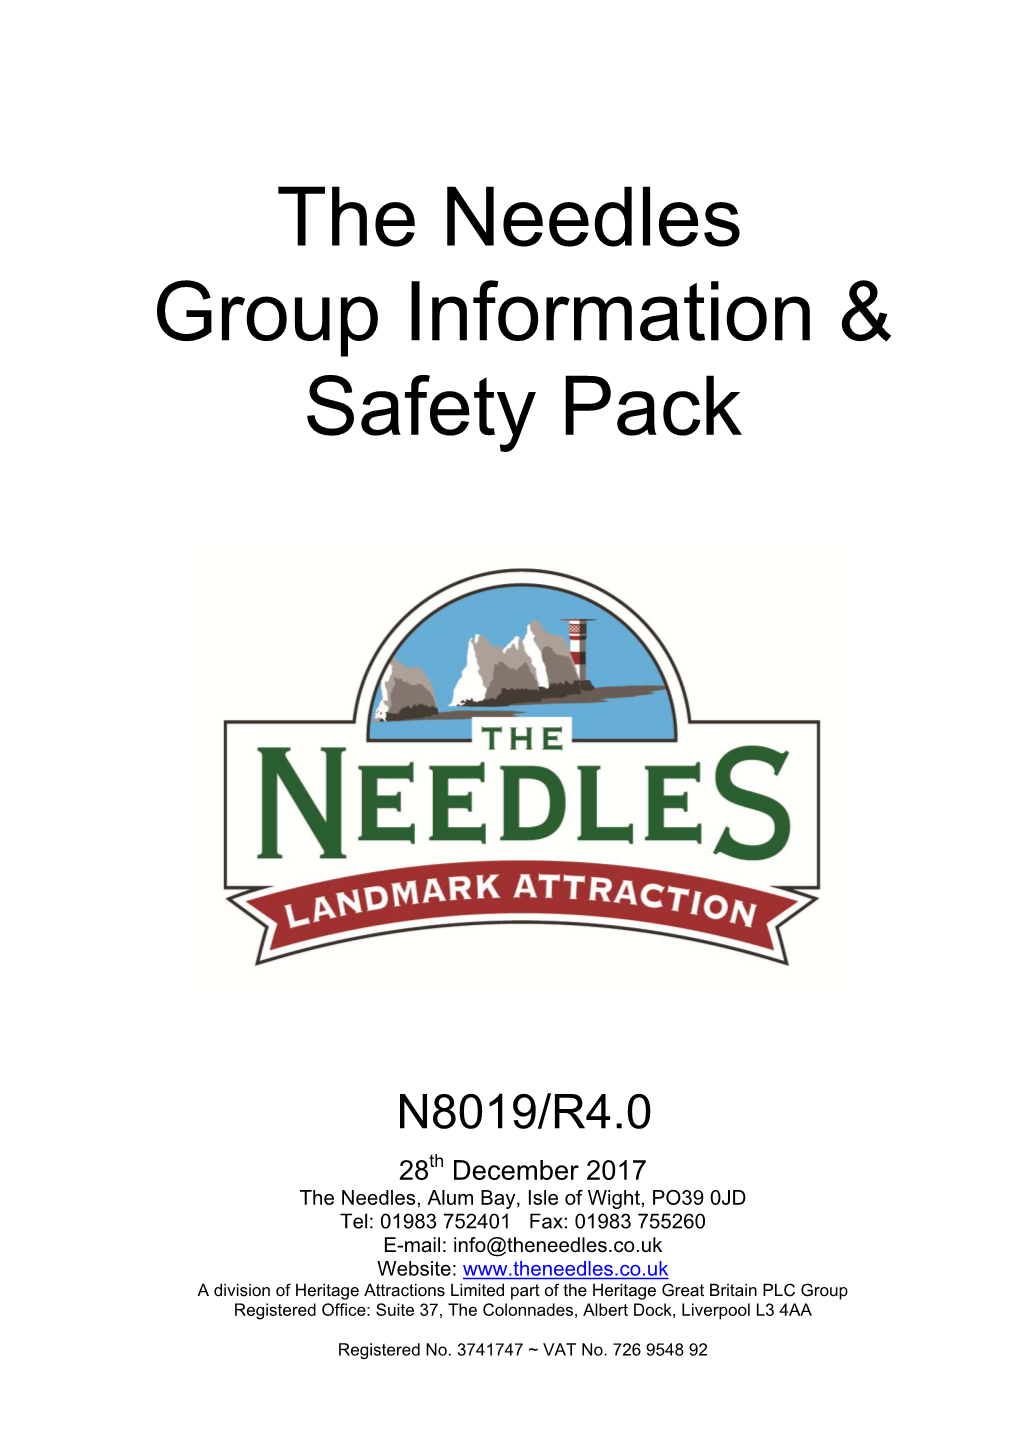 The Needles Group Information & Safety Pack